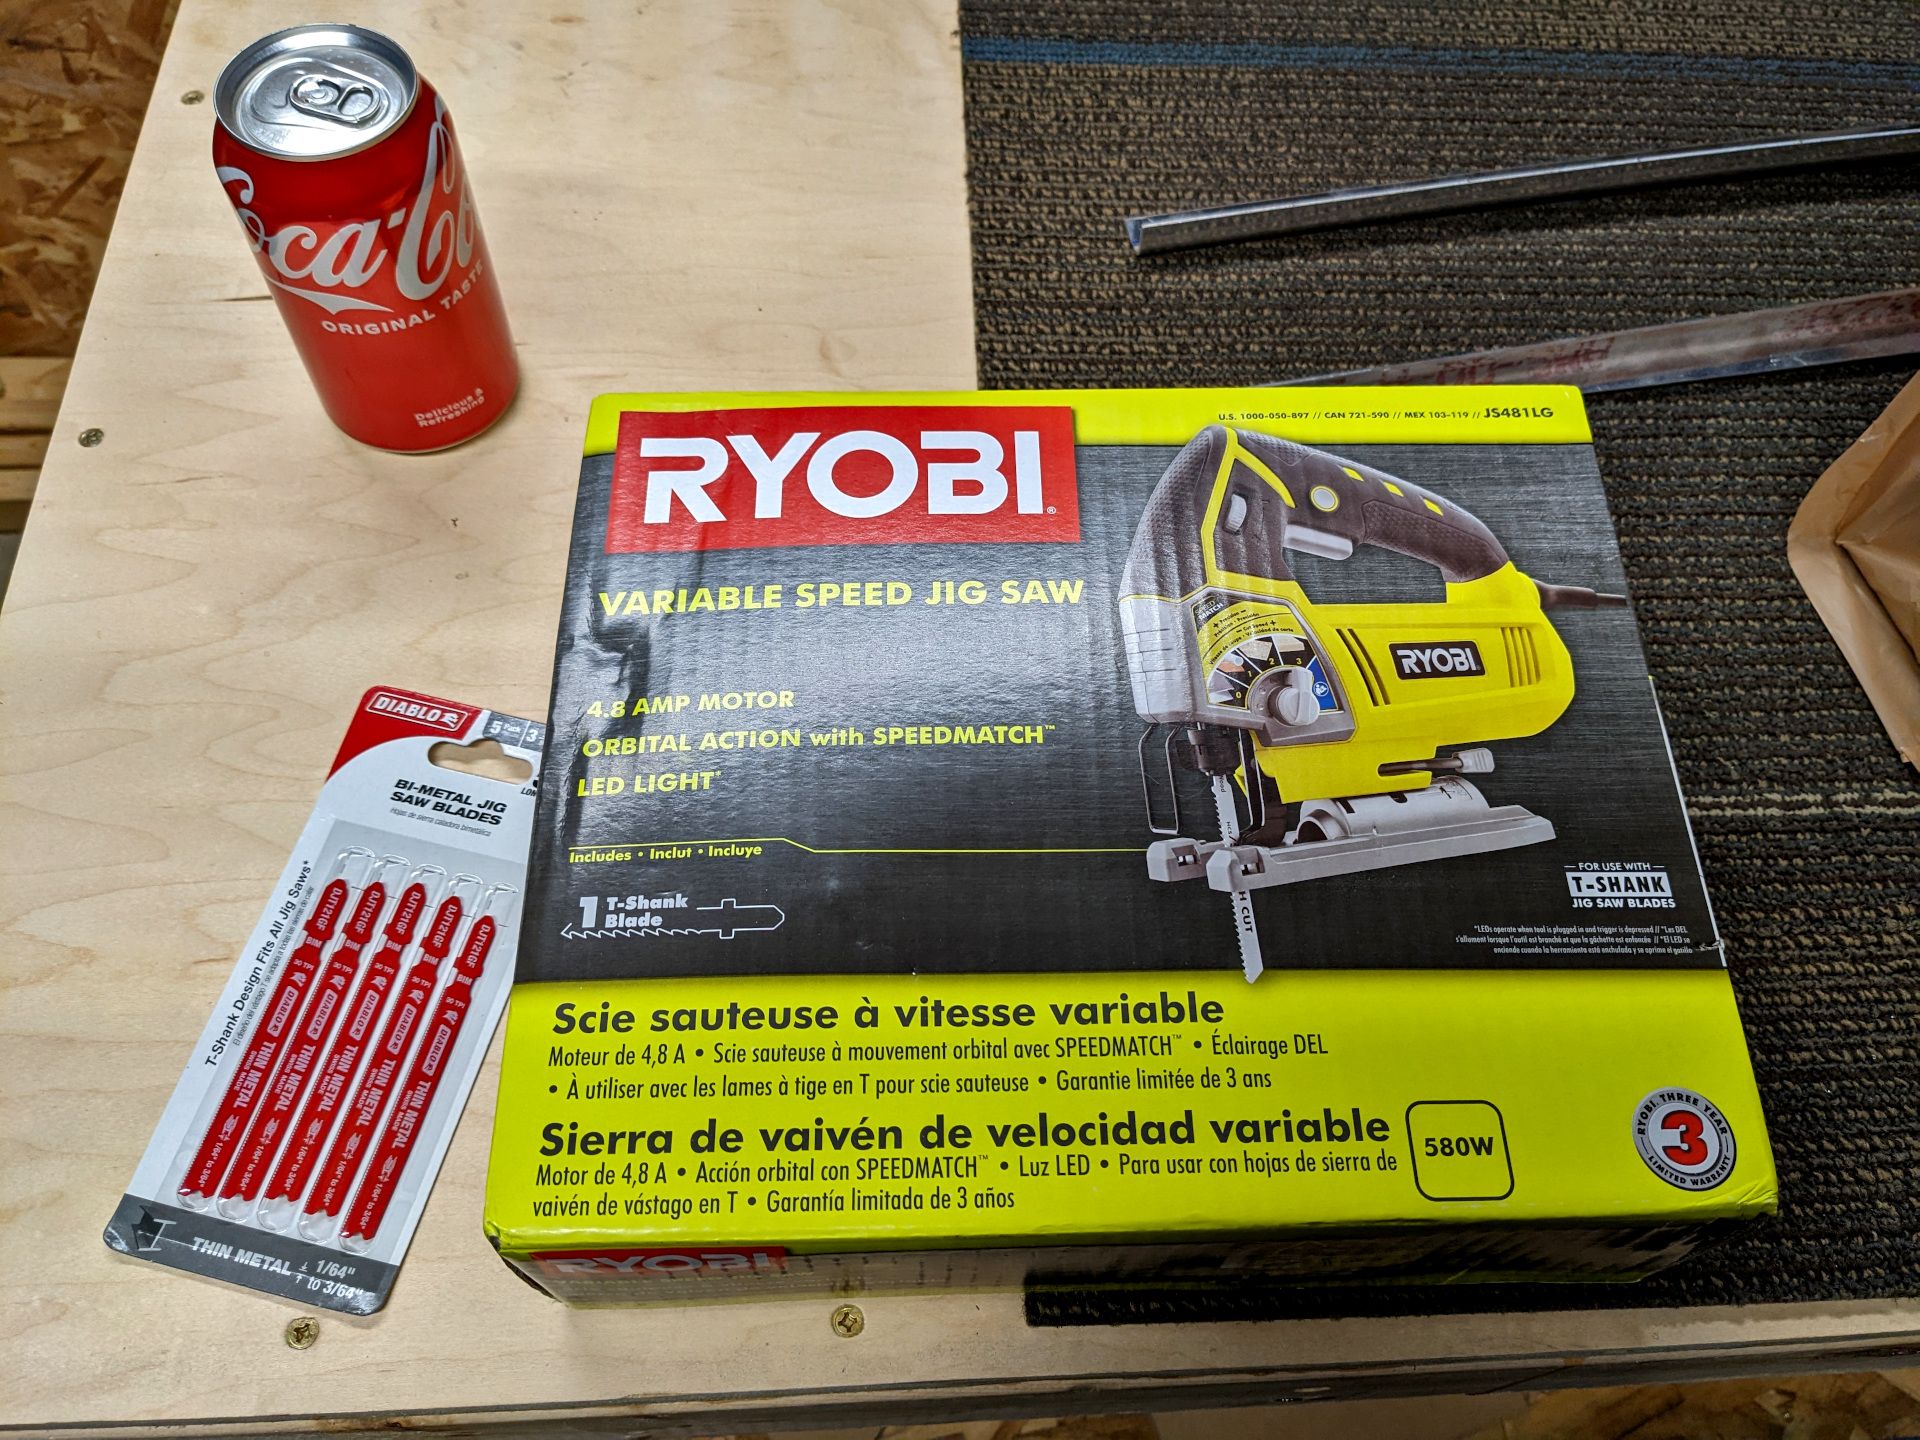 A Ryobi Jigsaw box, a pack of 5 metal cutting blades, and one Coca-Cola (unopened)